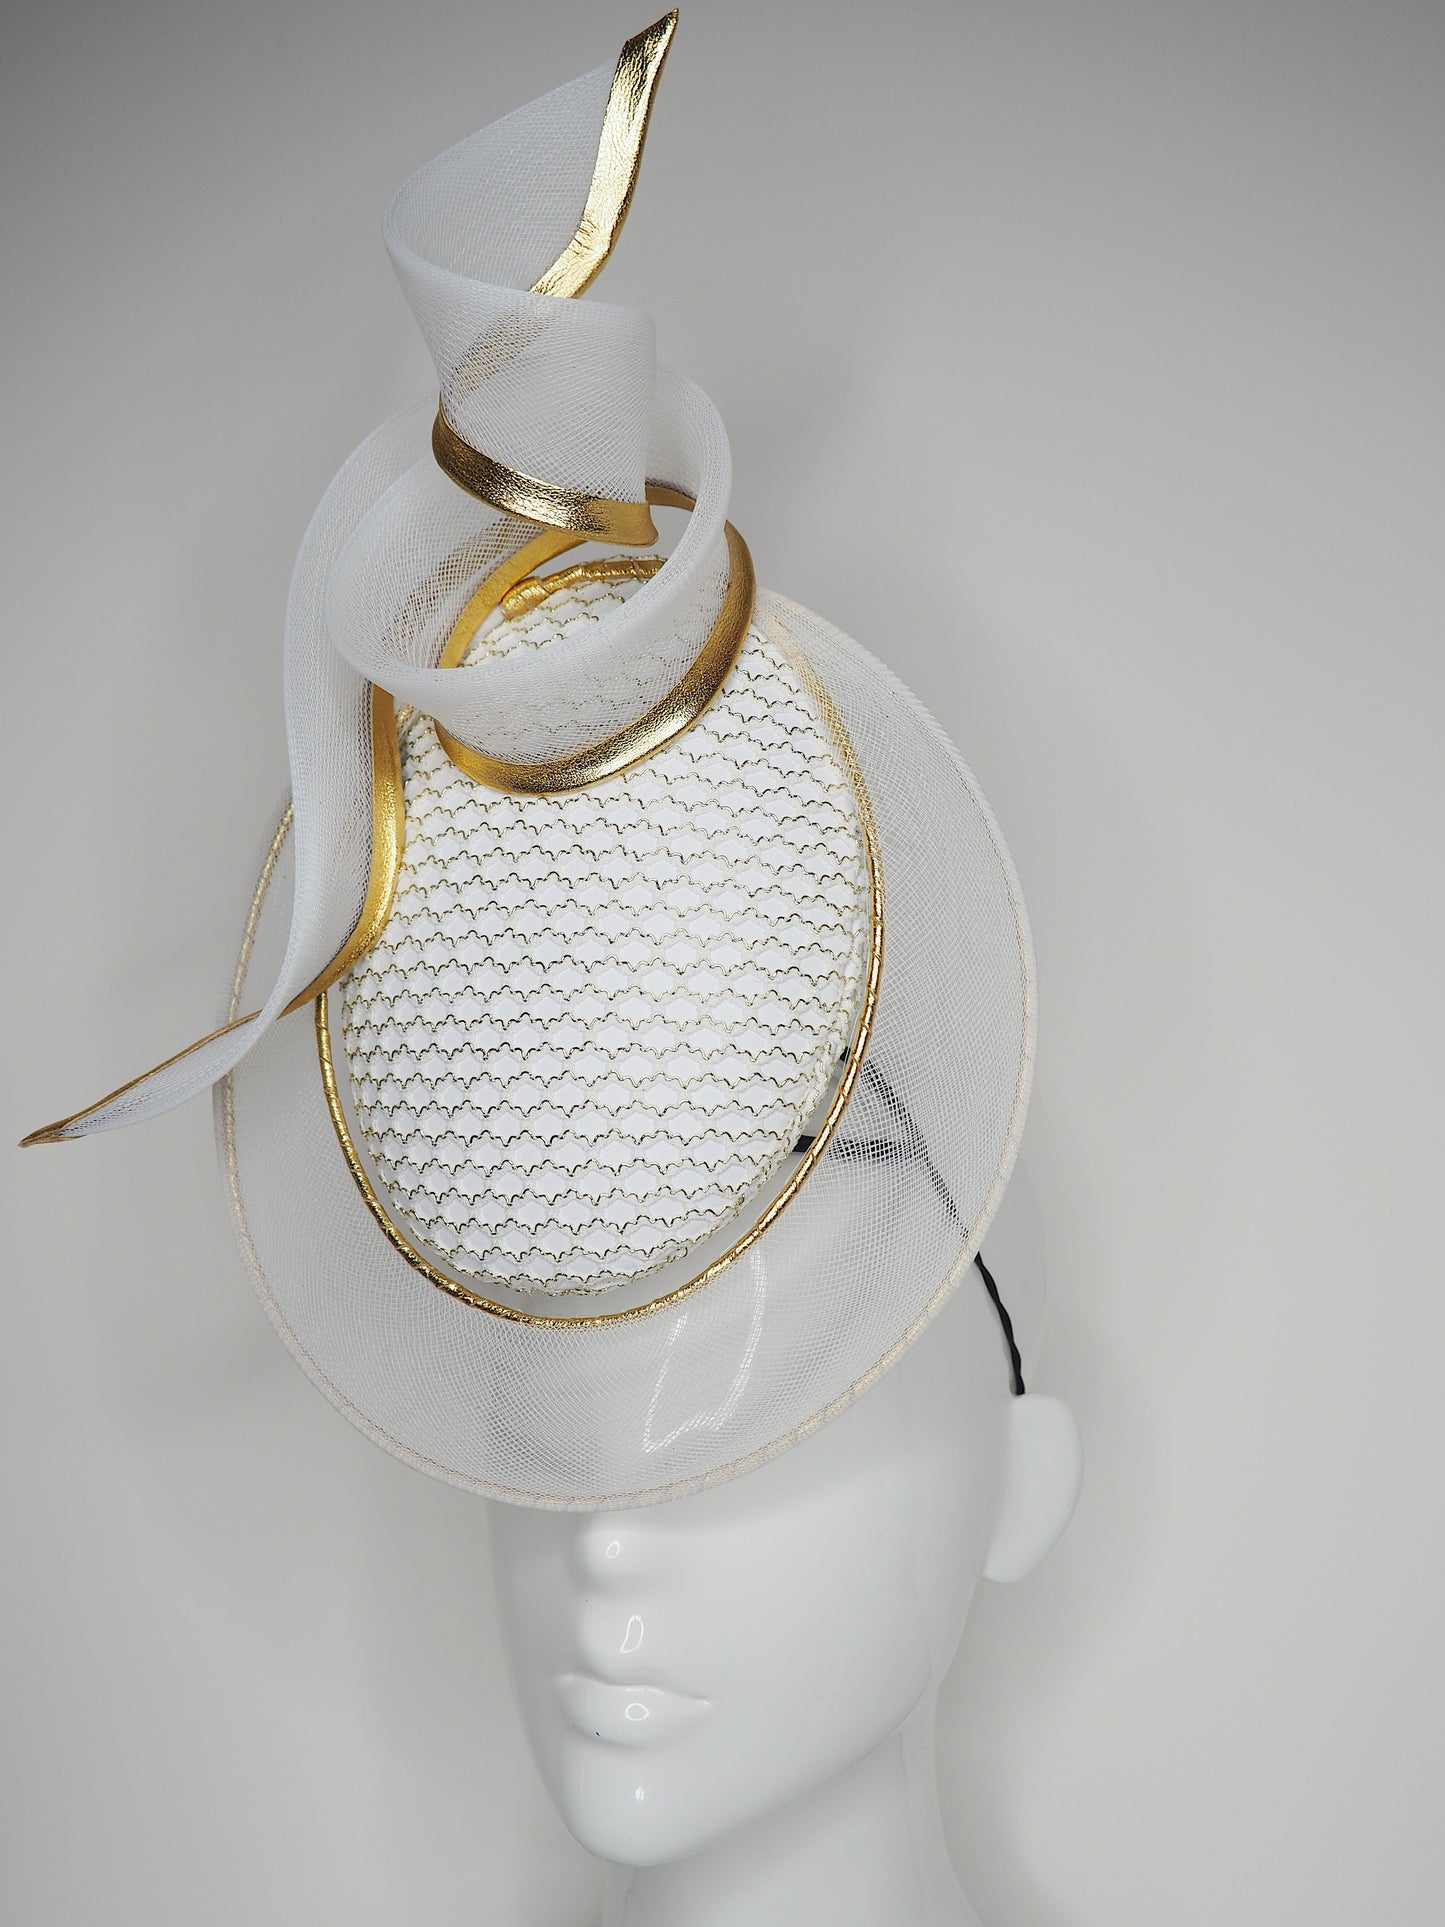 Golden lights - White leather and gold trimmed percher with wired veil and mesh detail